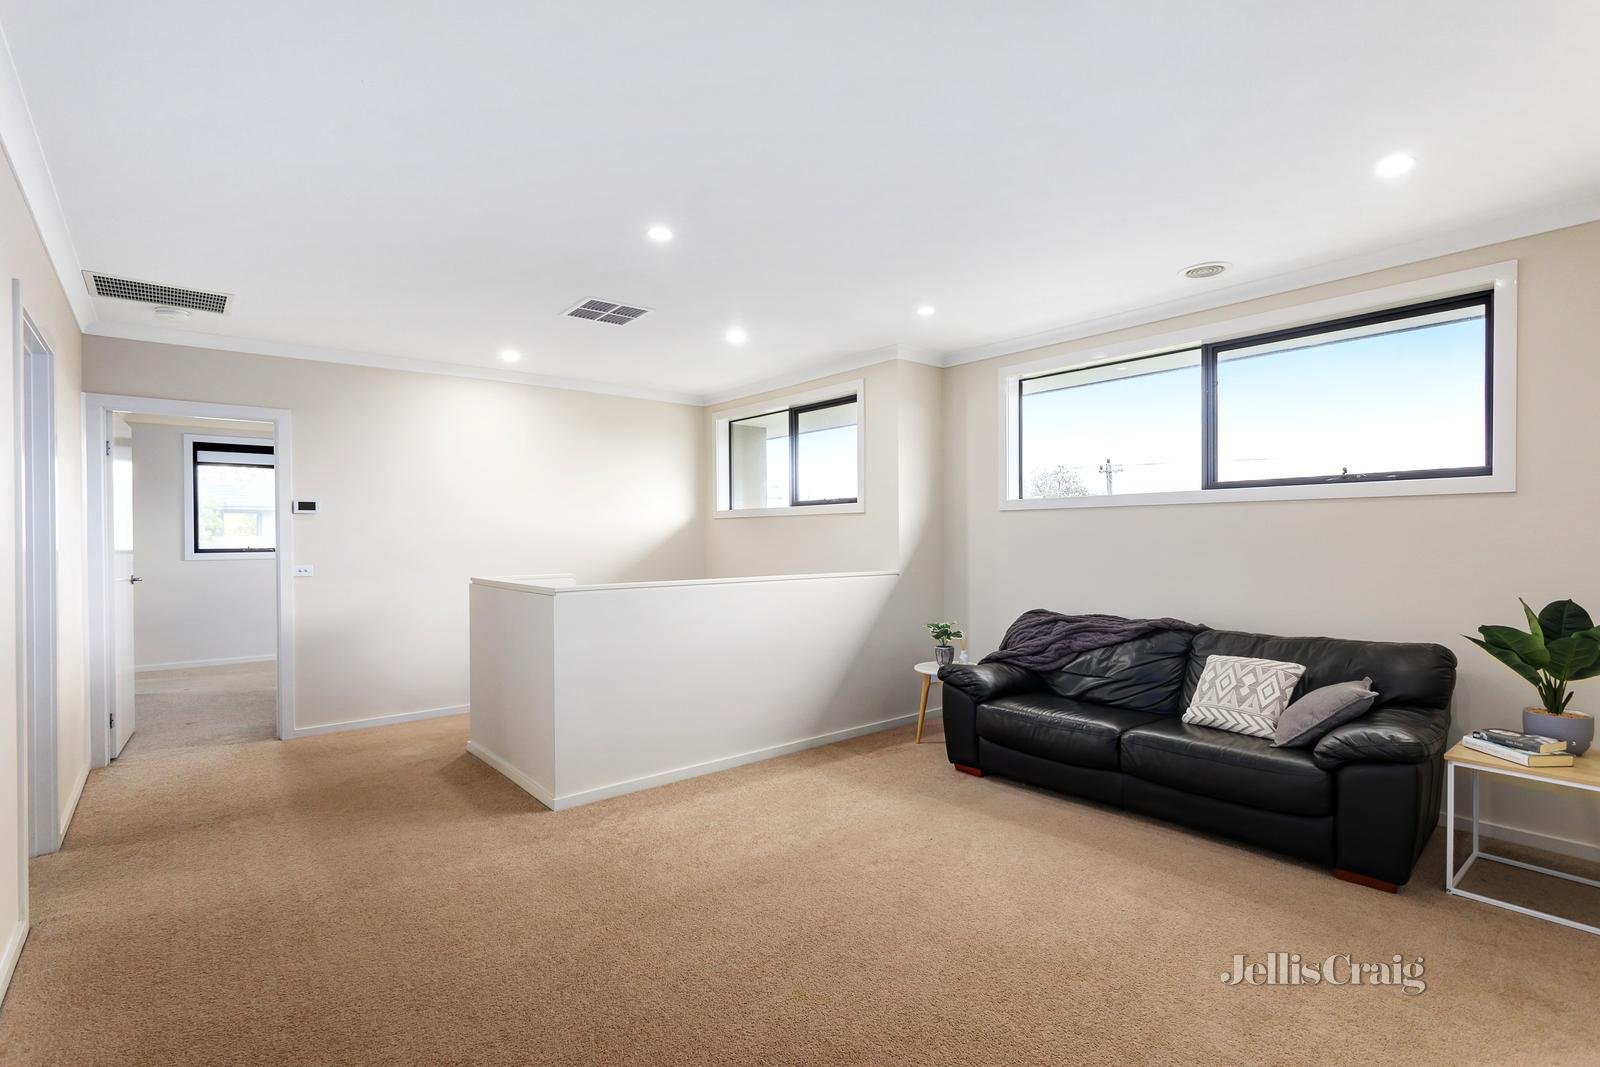 1B Daly Street, Doncaster image 7